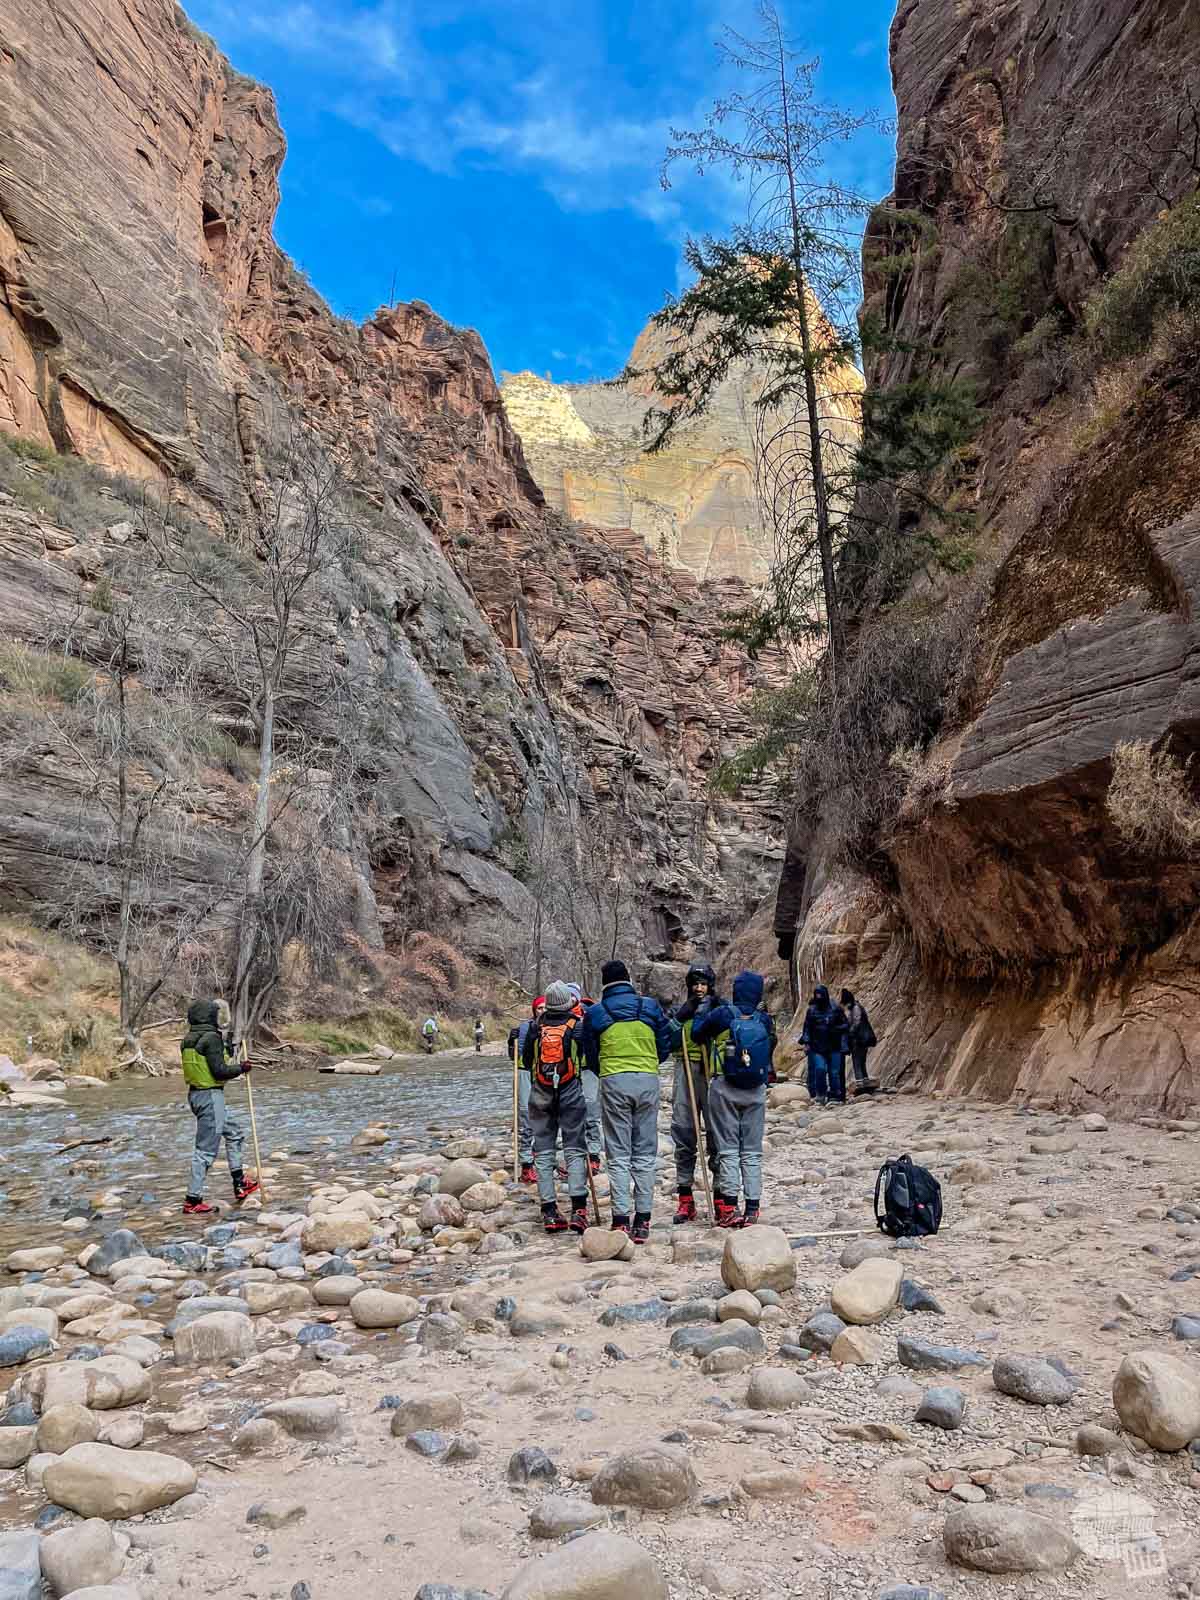 Hiking The Narrows at Zion National Park in the winter.